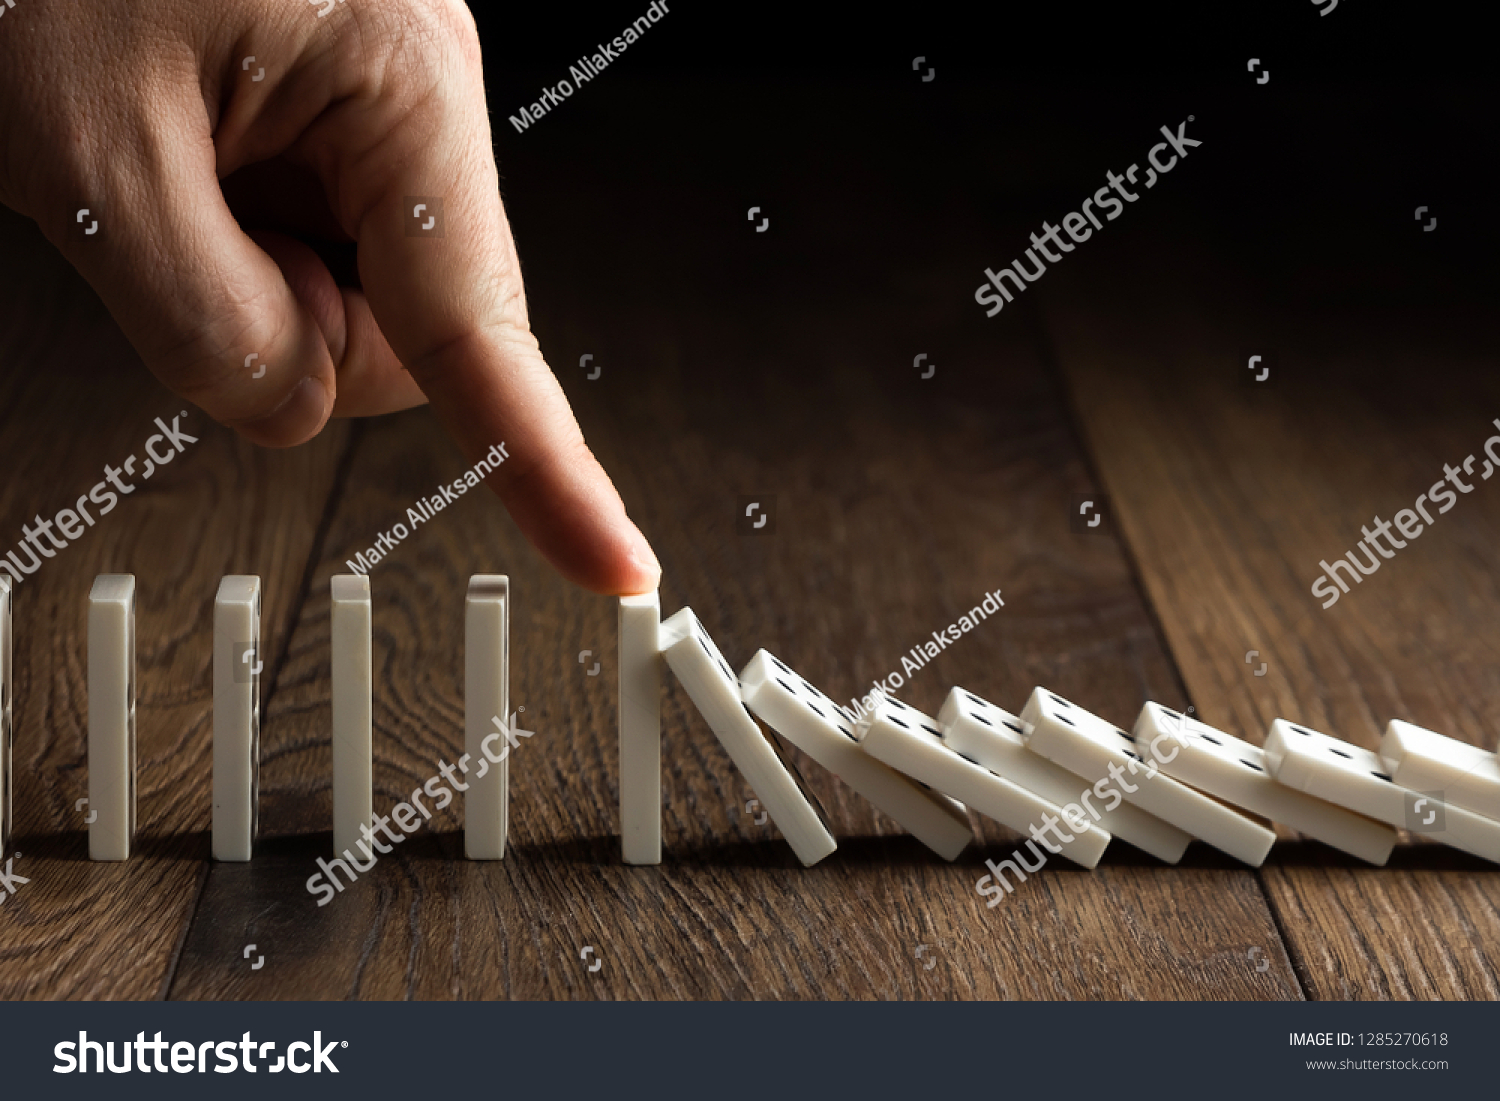 Creative background, Men's hand stopped domino effect, on a brown wooden background. Concept of domino effect, chain reaction, risk management, copy space. #1285270618